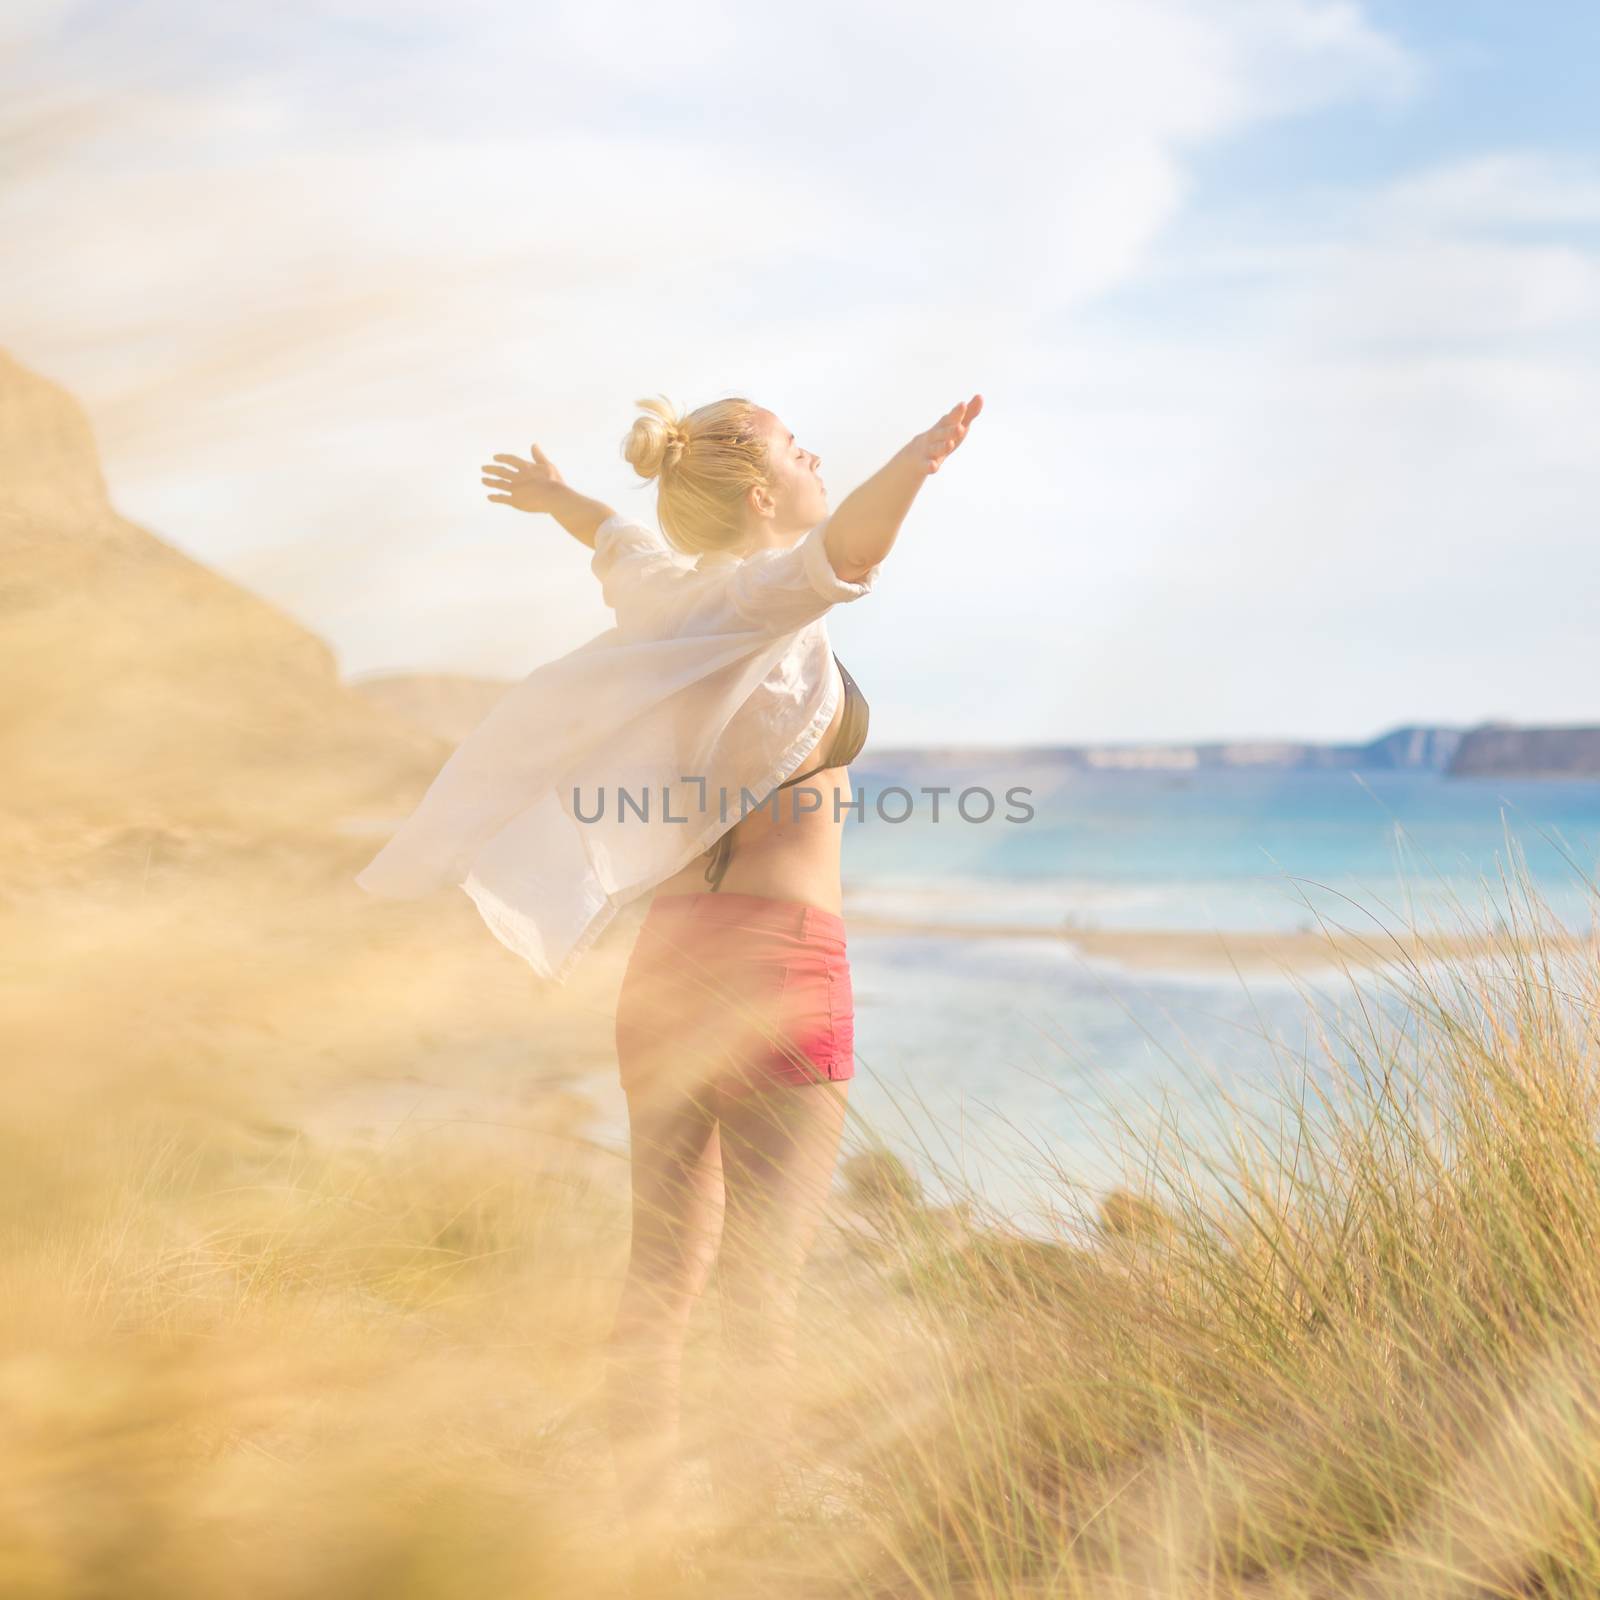 Relaxed woman in white shirt, arms rised, enjoying sun, freedom and life an beautiful beach. Young lady feeling free, relaxed and happy. Concept of vacations, freedom, happiness, joy and well being.